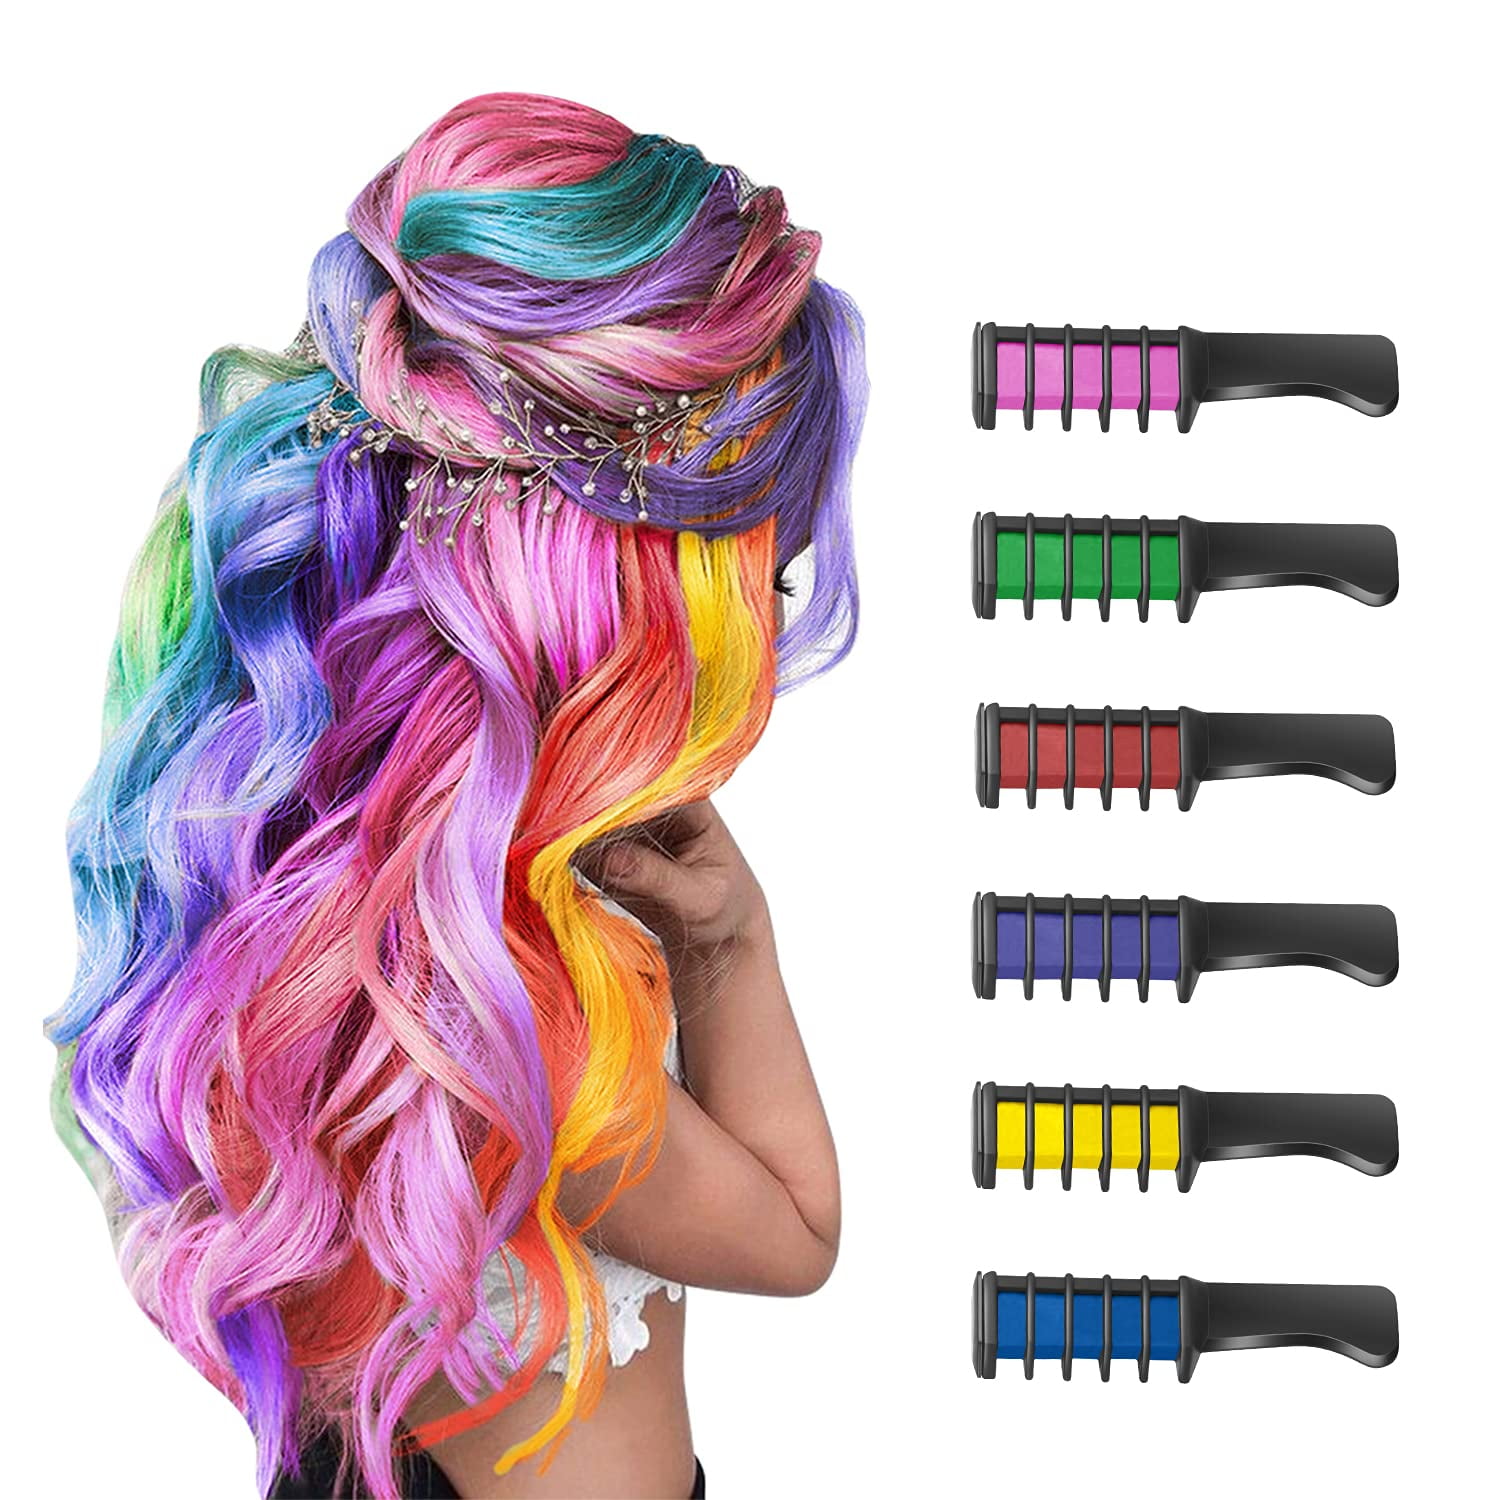 Glow Temporary Hair Chalk Comb, Glow in The Black Light Washable Hair Color  Comb for Girls Kids Non-Toxic Hair Dye for Birthday Halloween Cosplay